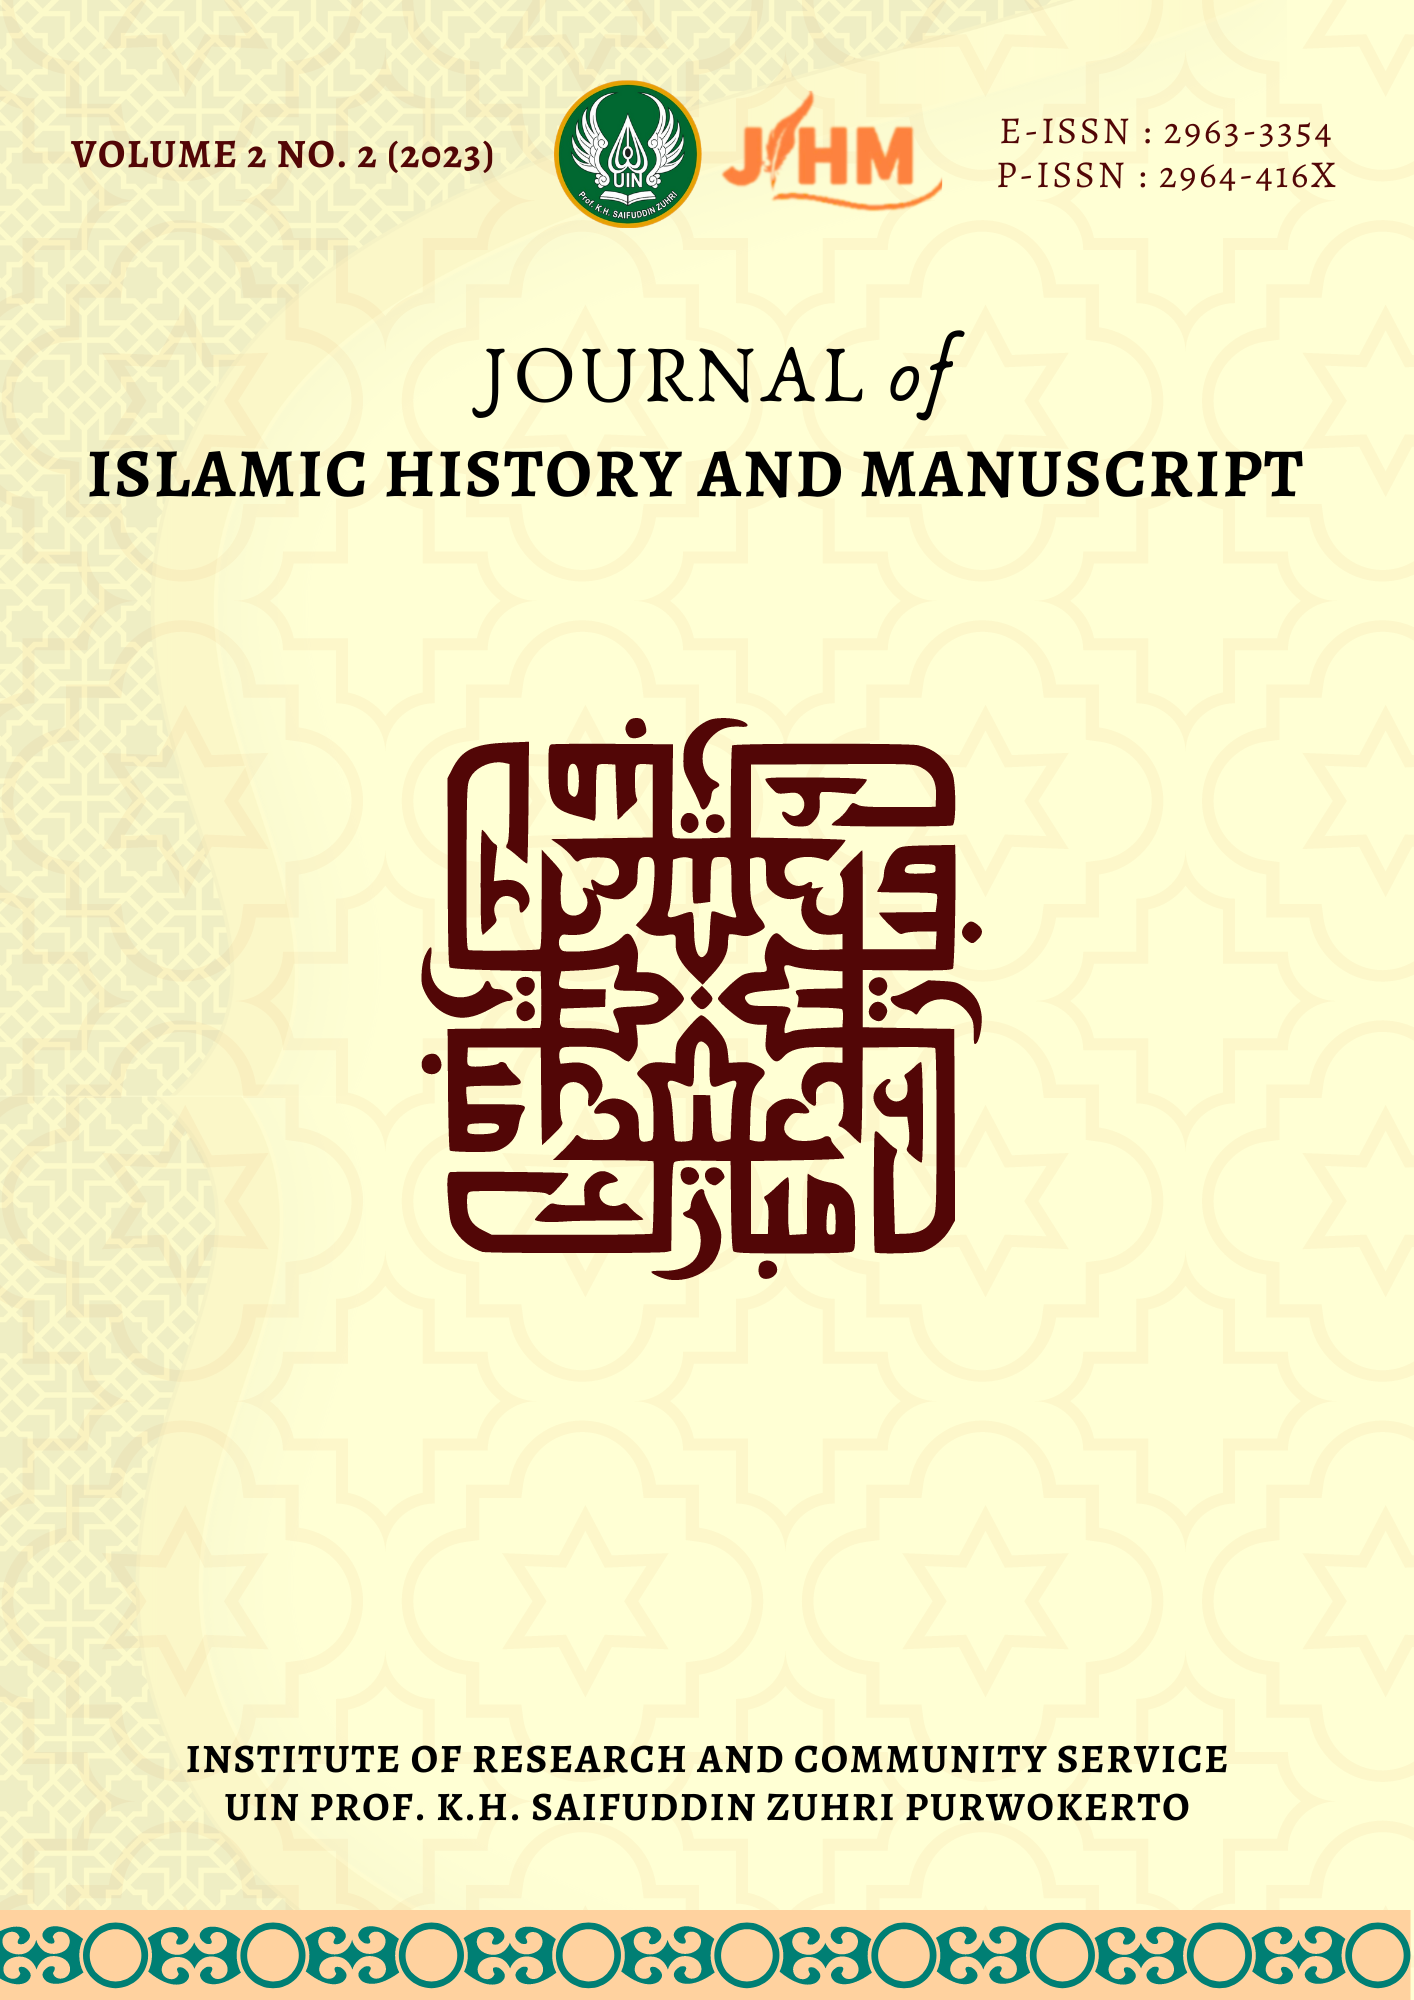 					View Vol. 2 No. 2 (2023): Journal of Islamic History and Manuscript
				